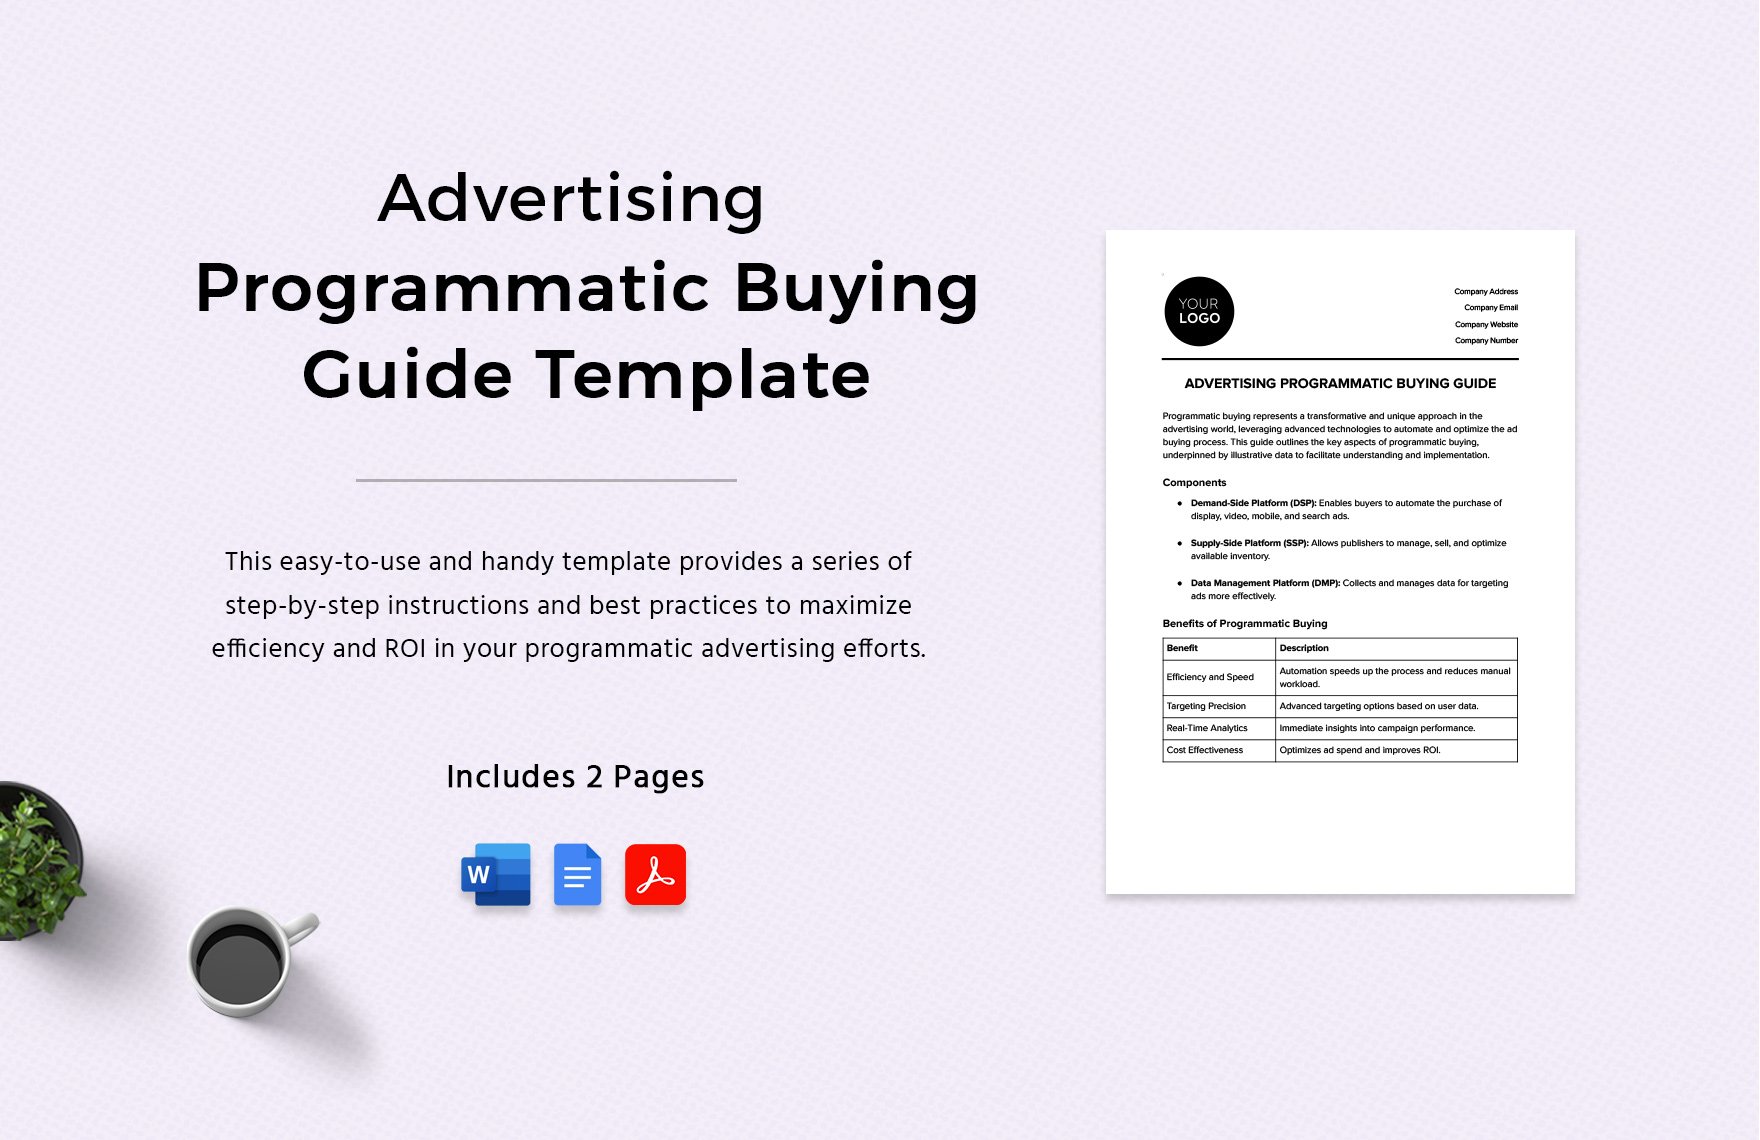 Advertising Programmatic Buying Guide Template in Word, Google Docs, PDF